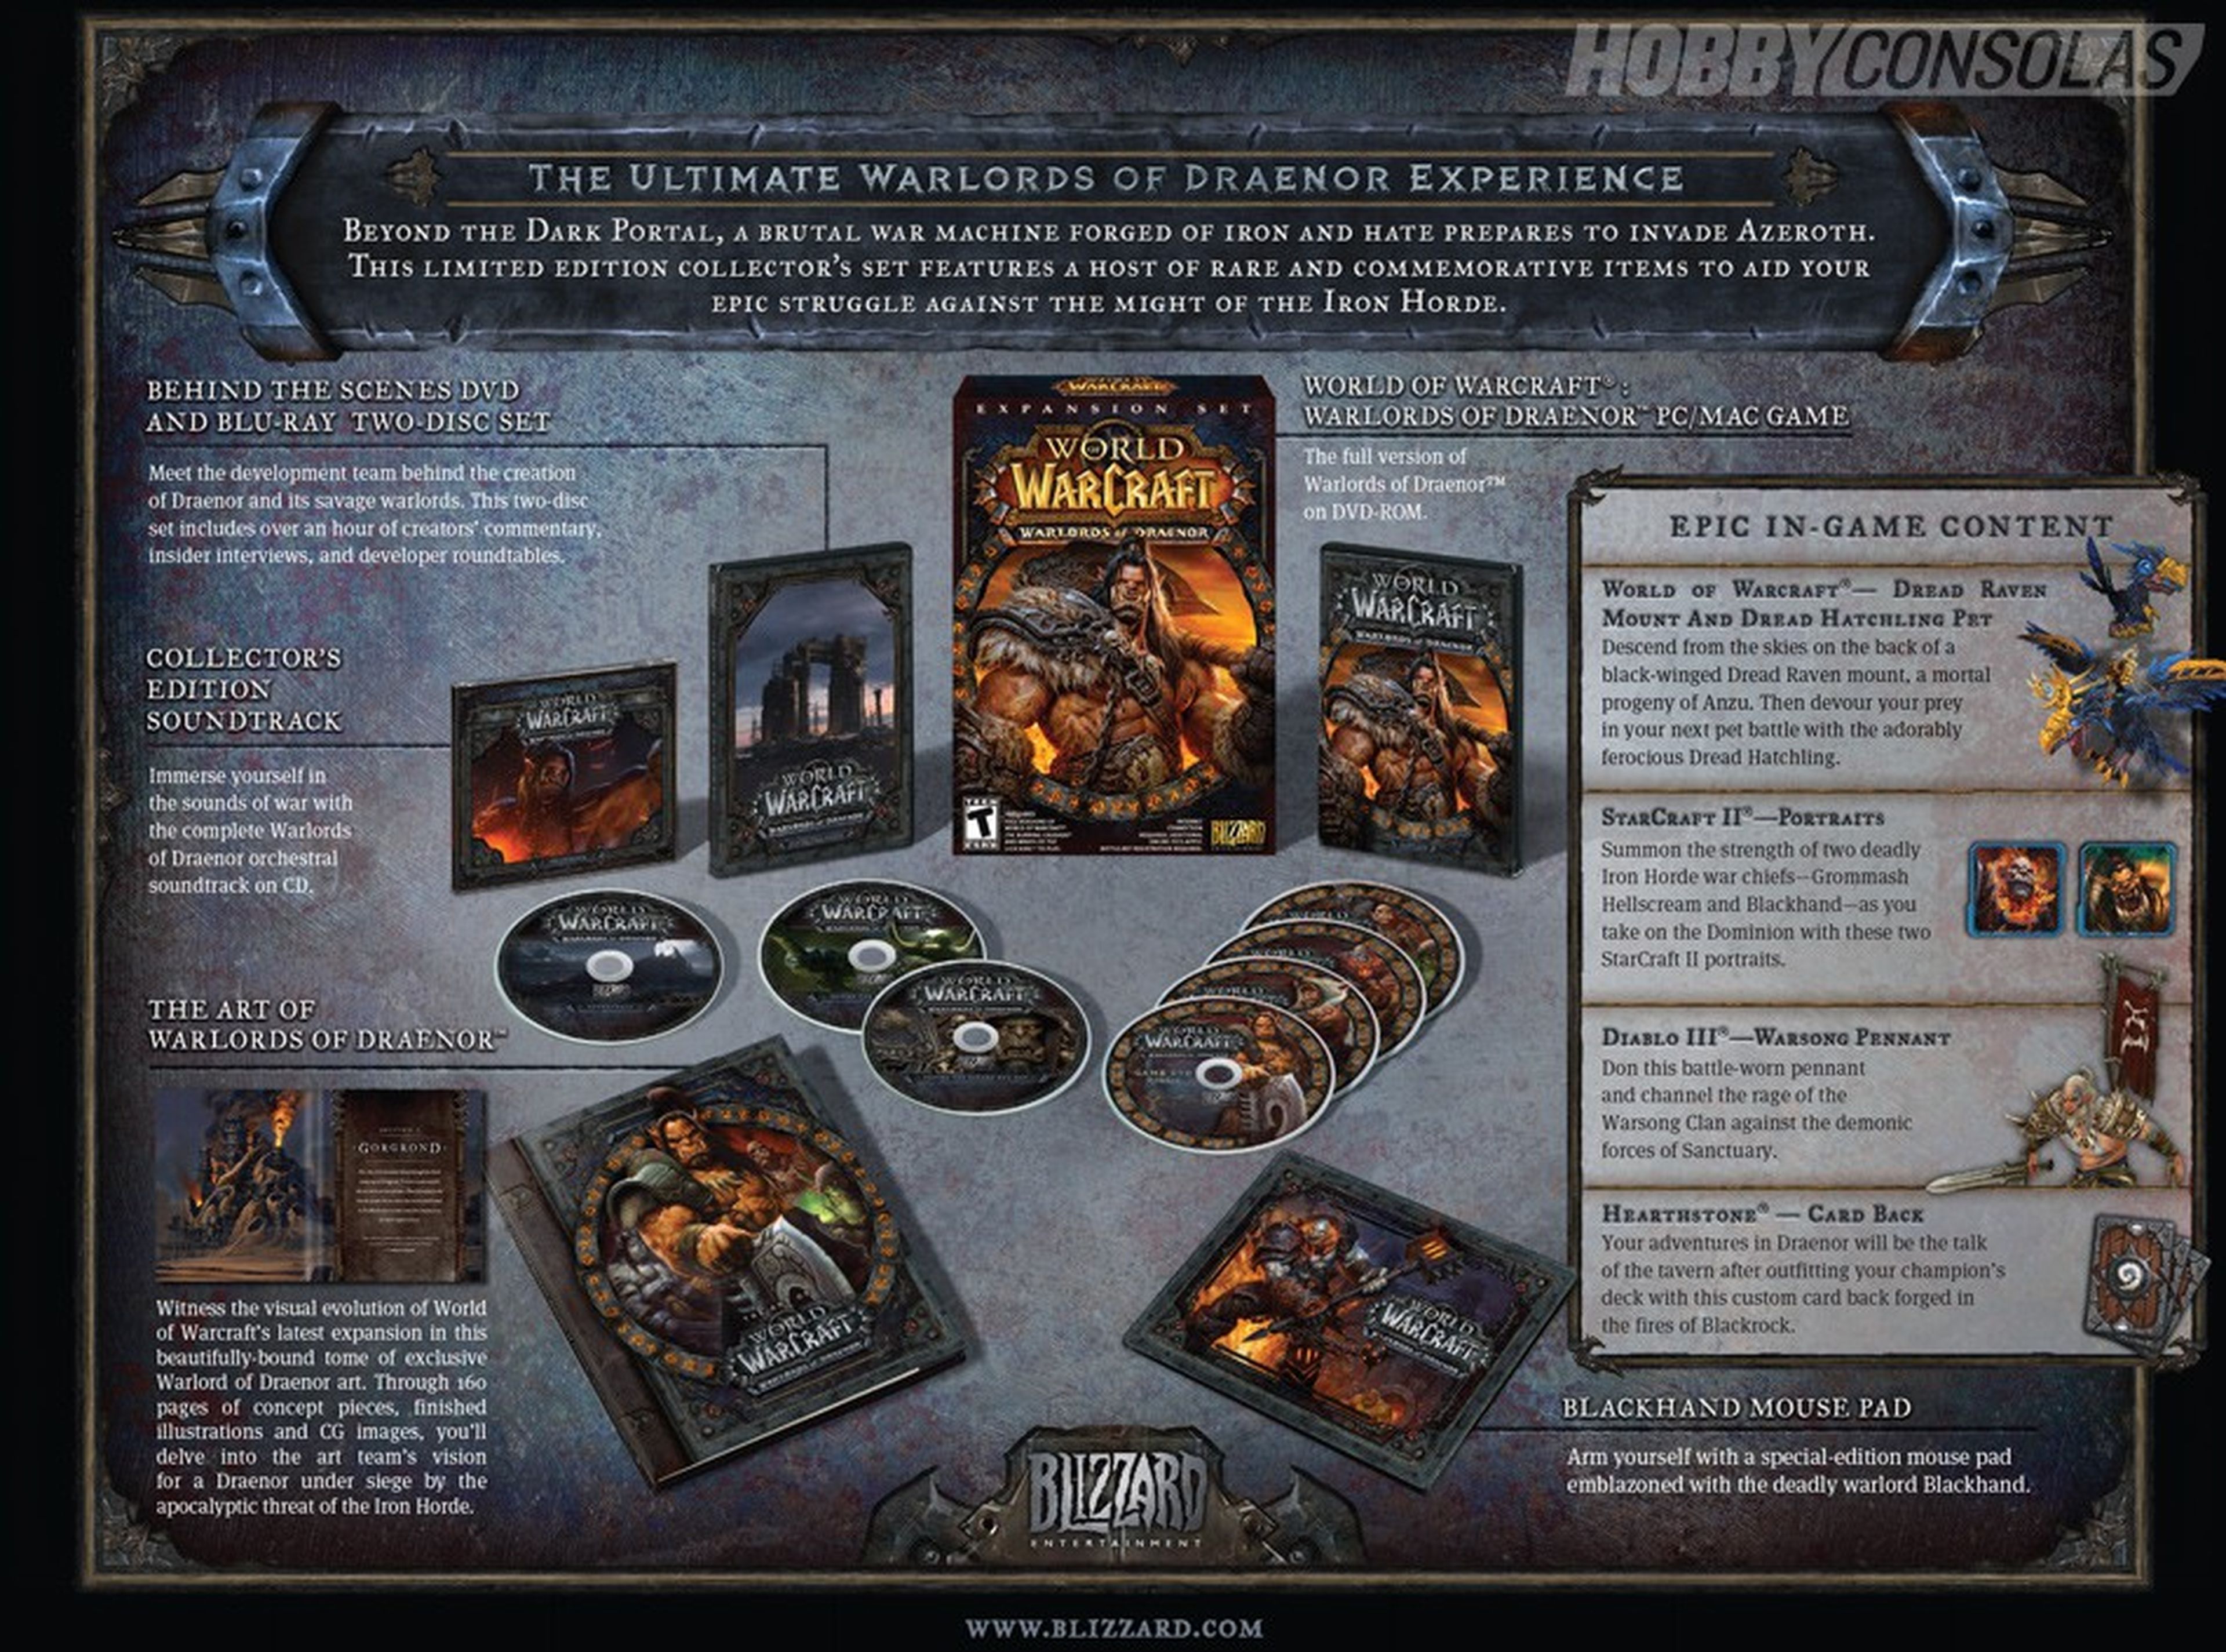 Análisis de World of Warcraft: Warlords of Draenor